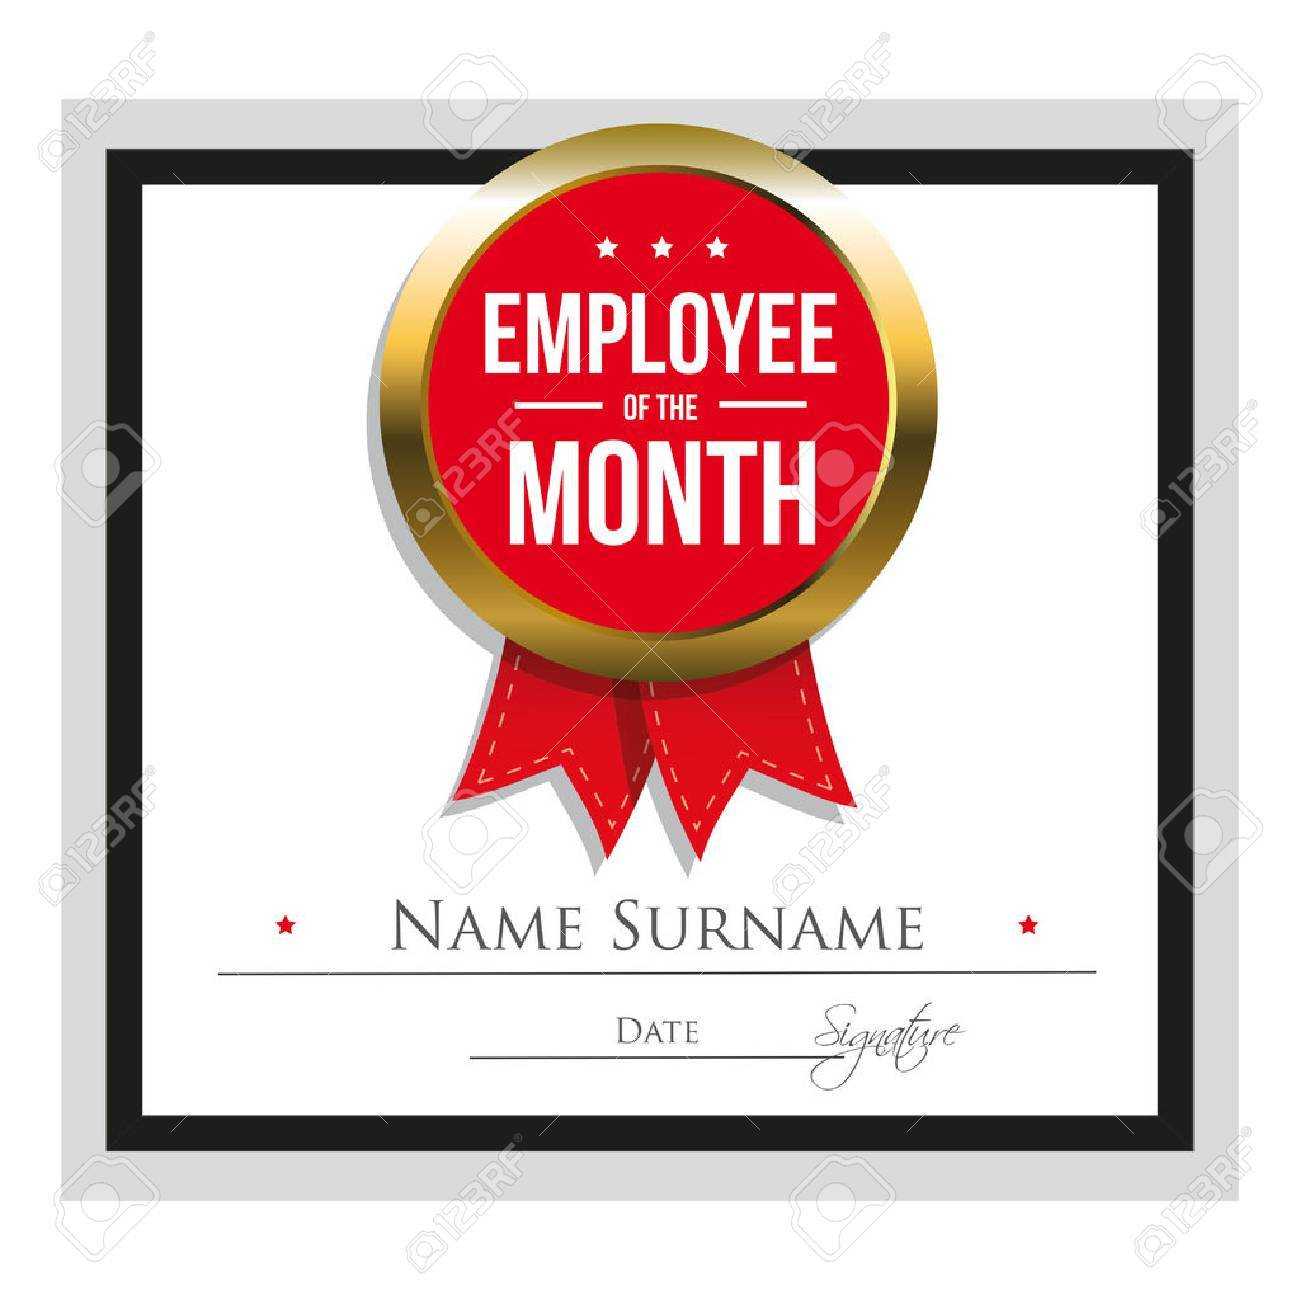 Employee Of The Month Certificate Template For Manager Of The Month Certificate Template